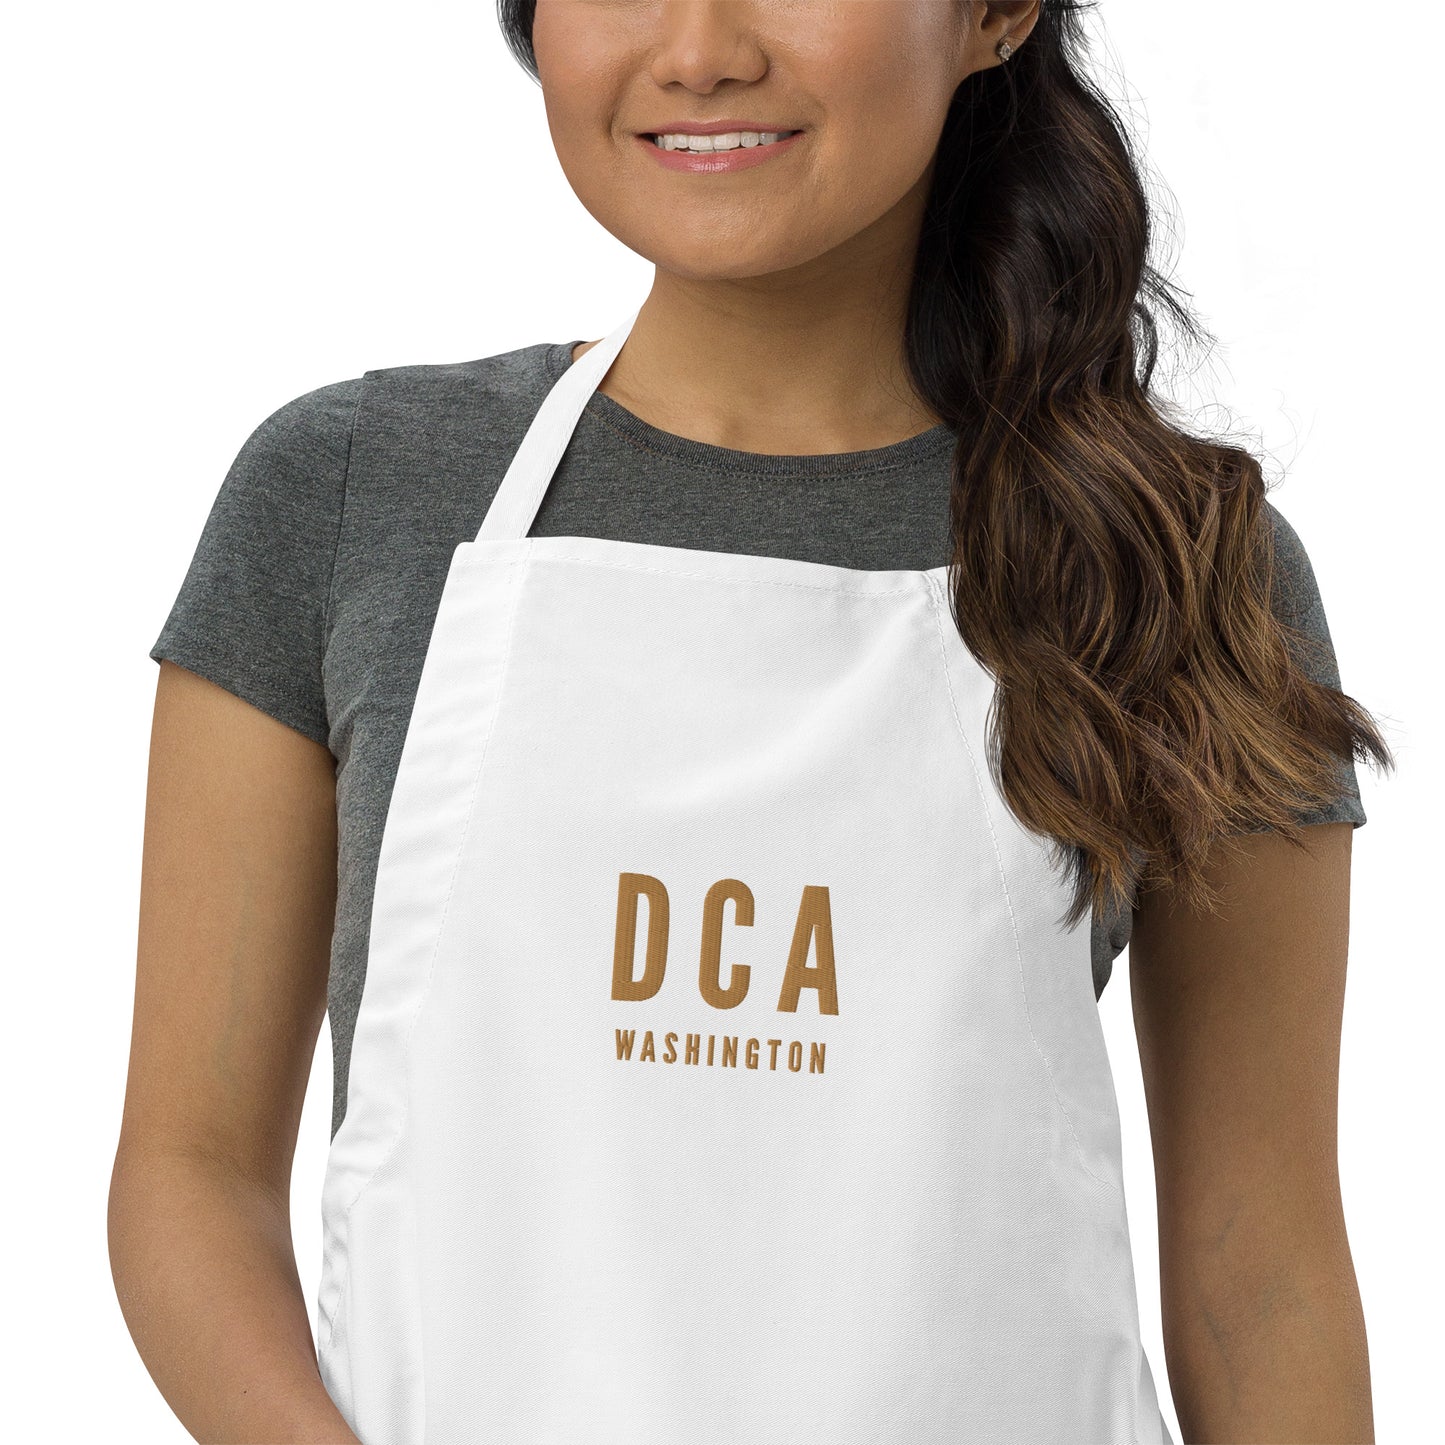 City Embroidered Apron - Old Gold • DCA Washington • YHM Designs - Image 08